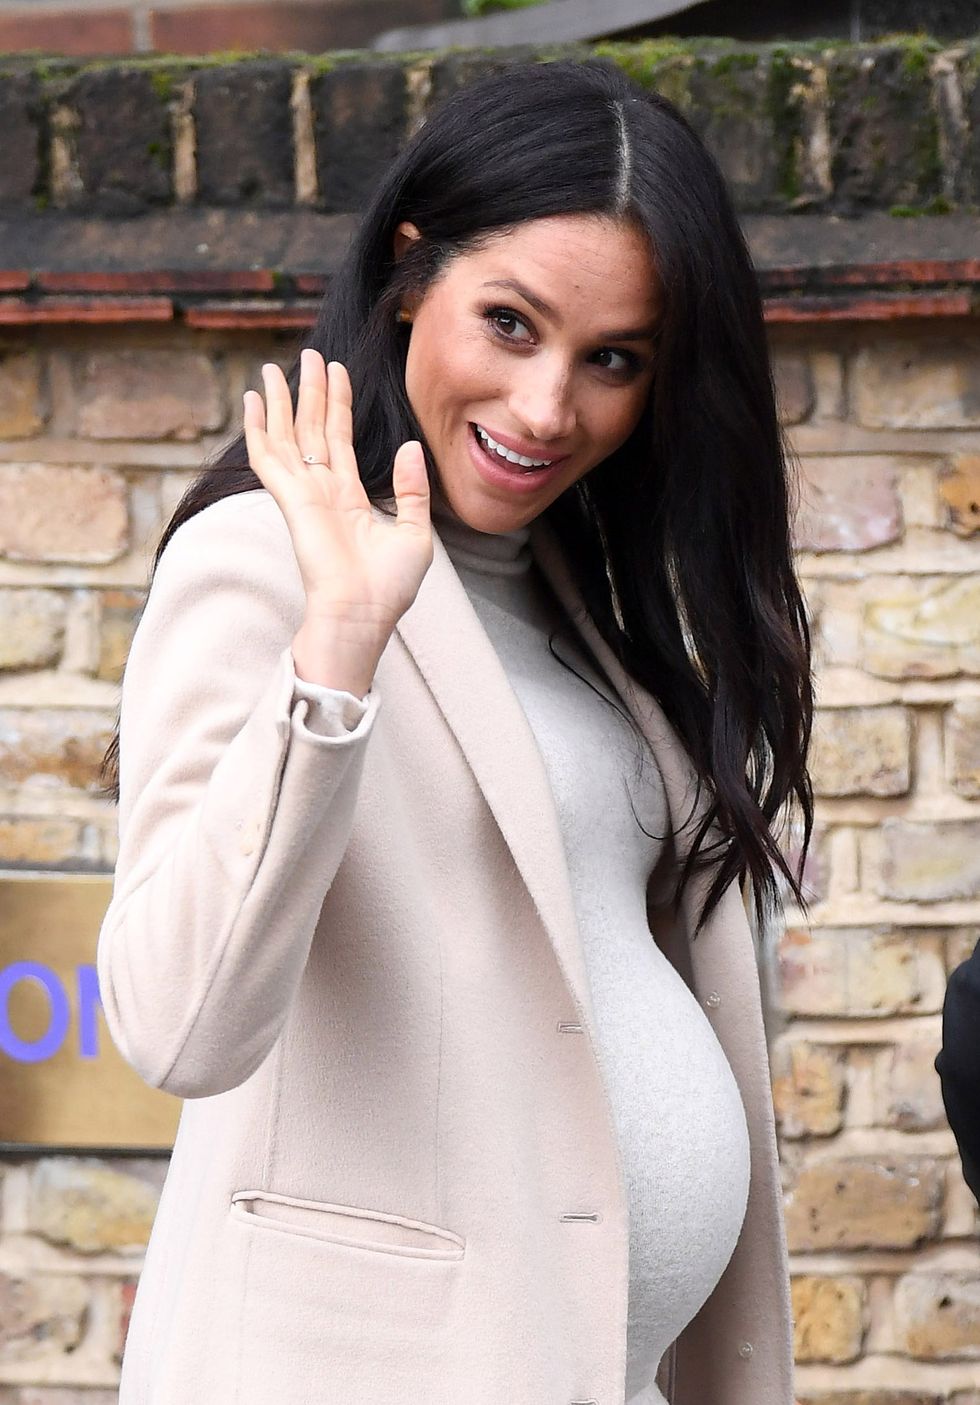 The Duchess Of Sussex Visits Mayhew Animal Welfare Charity